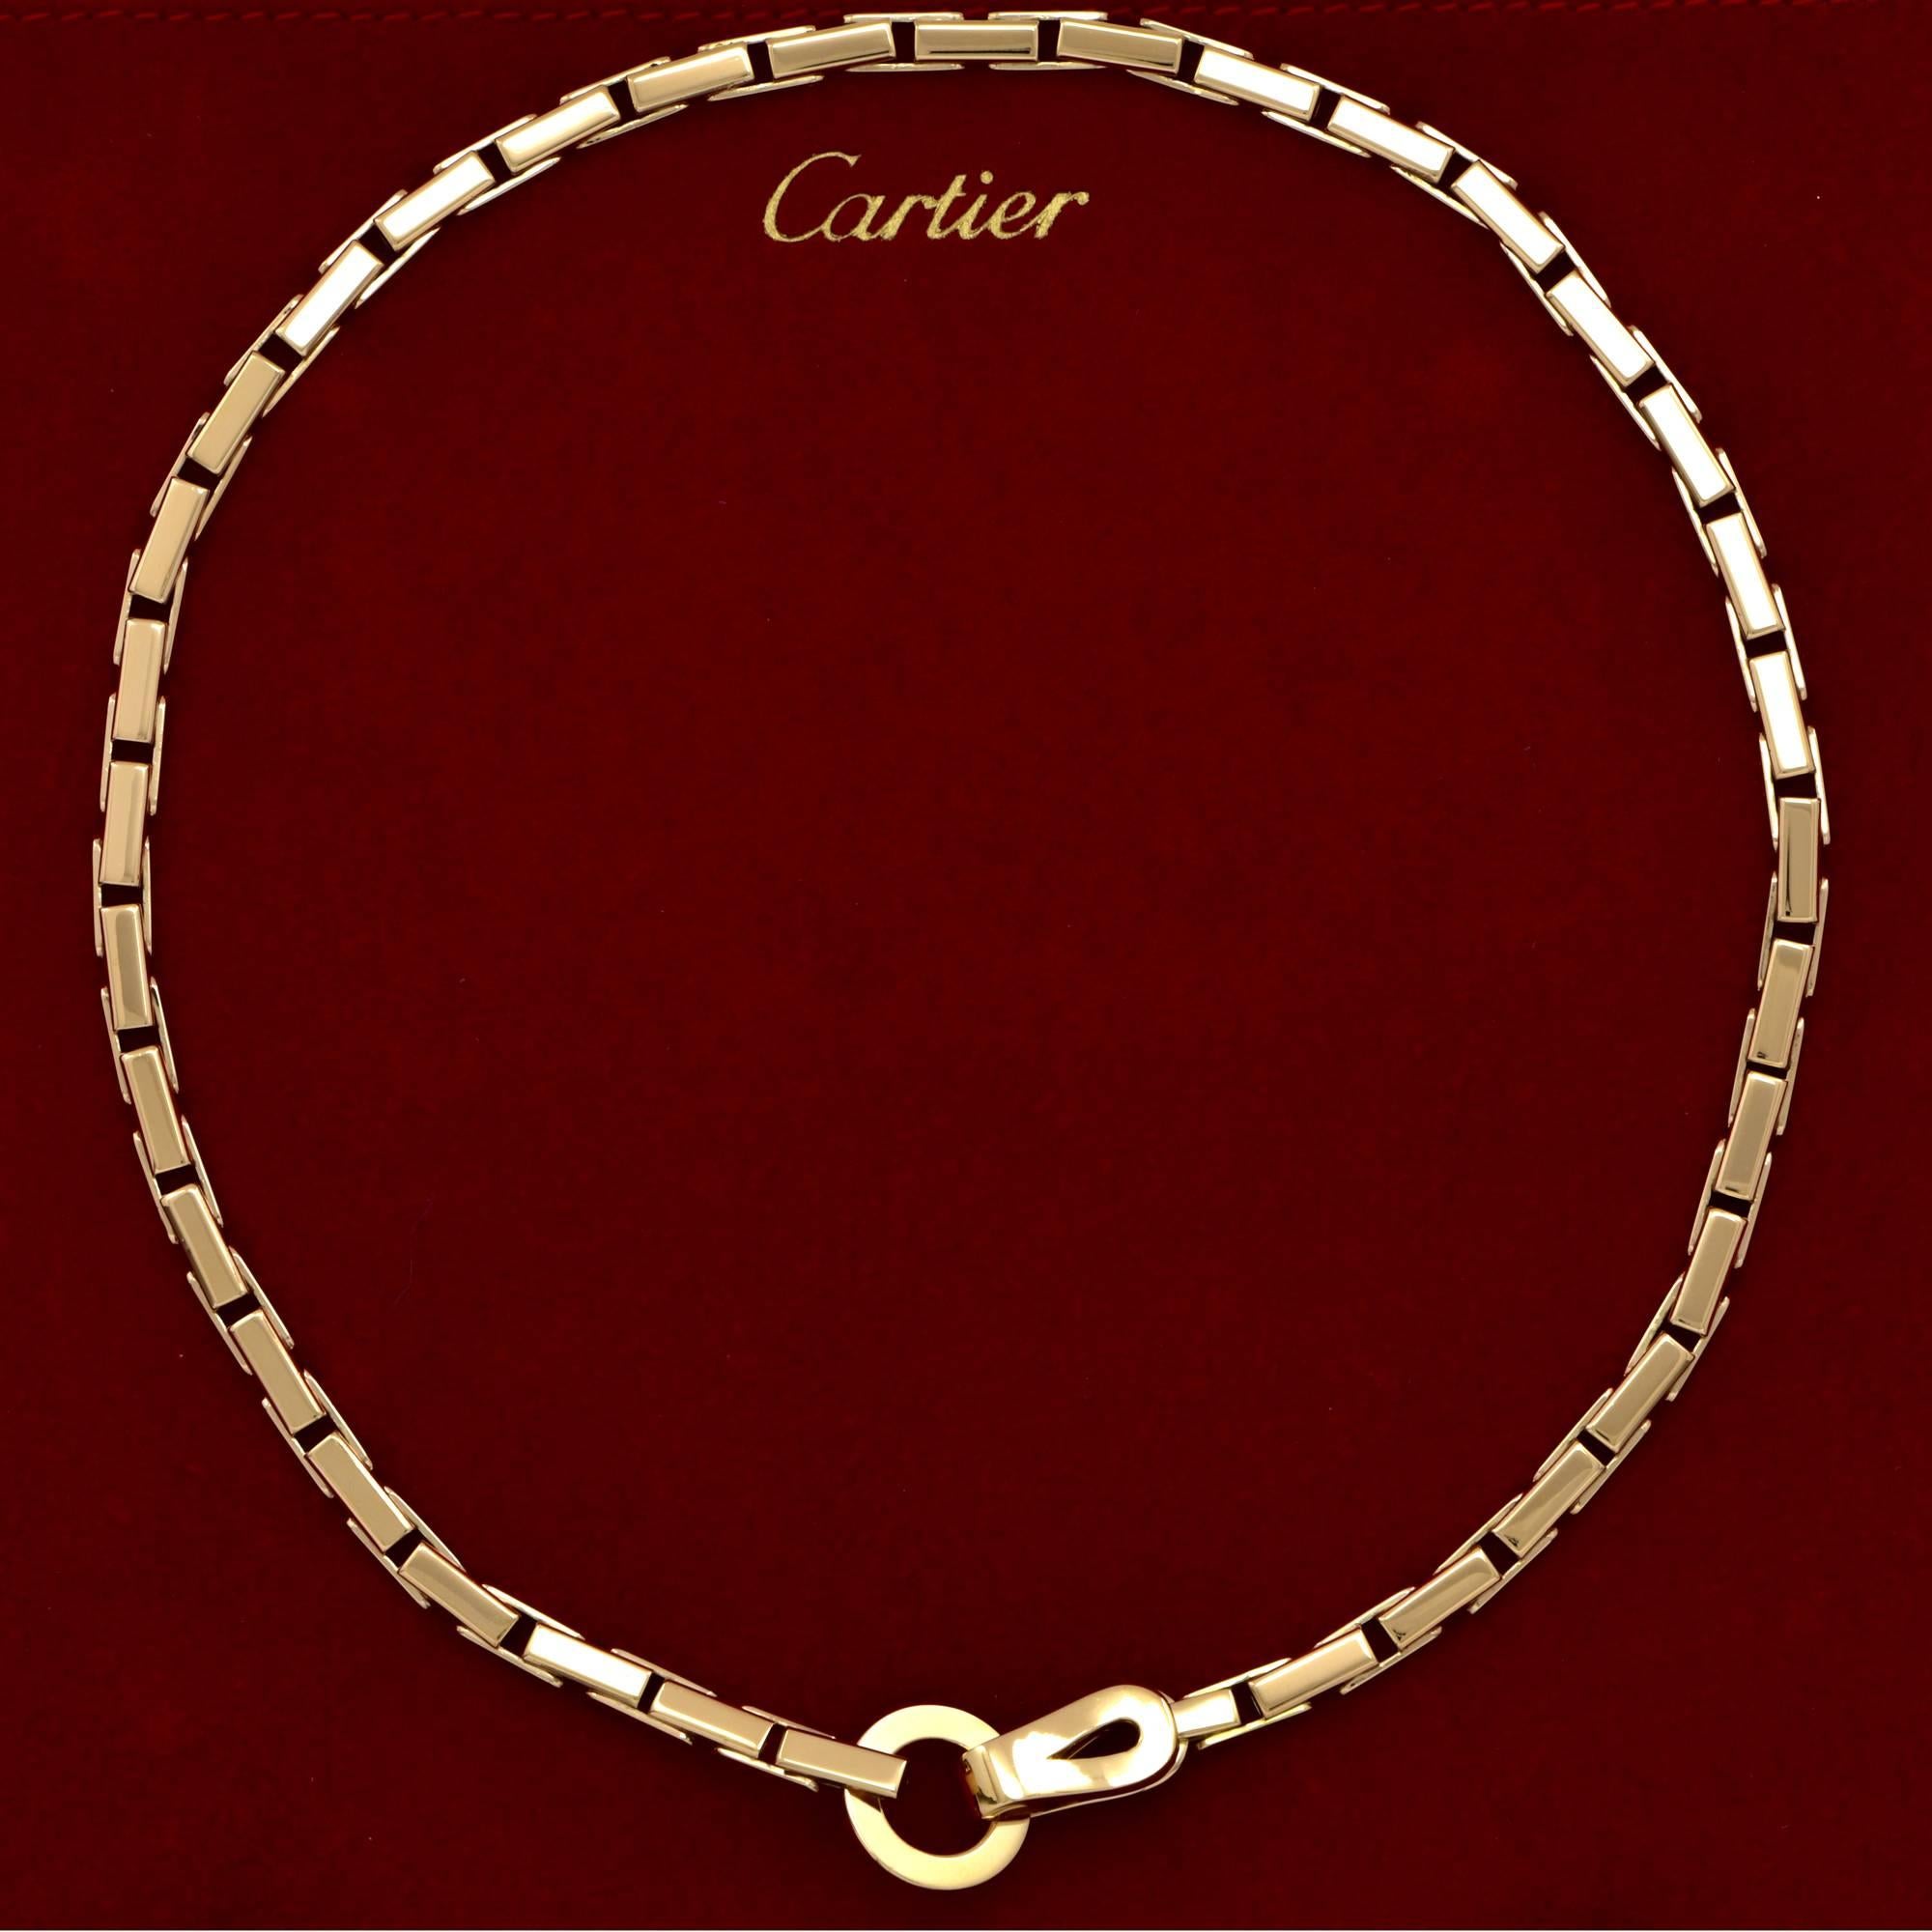 Glamorous 18k yellow gold authentic Cartier Agrafe necklace. A true testament to Cartier exemplary craftsmanship, this necklace features a simple yet elegant design, which can complement any outfit. Recently polished at Cartier, purchase comes with